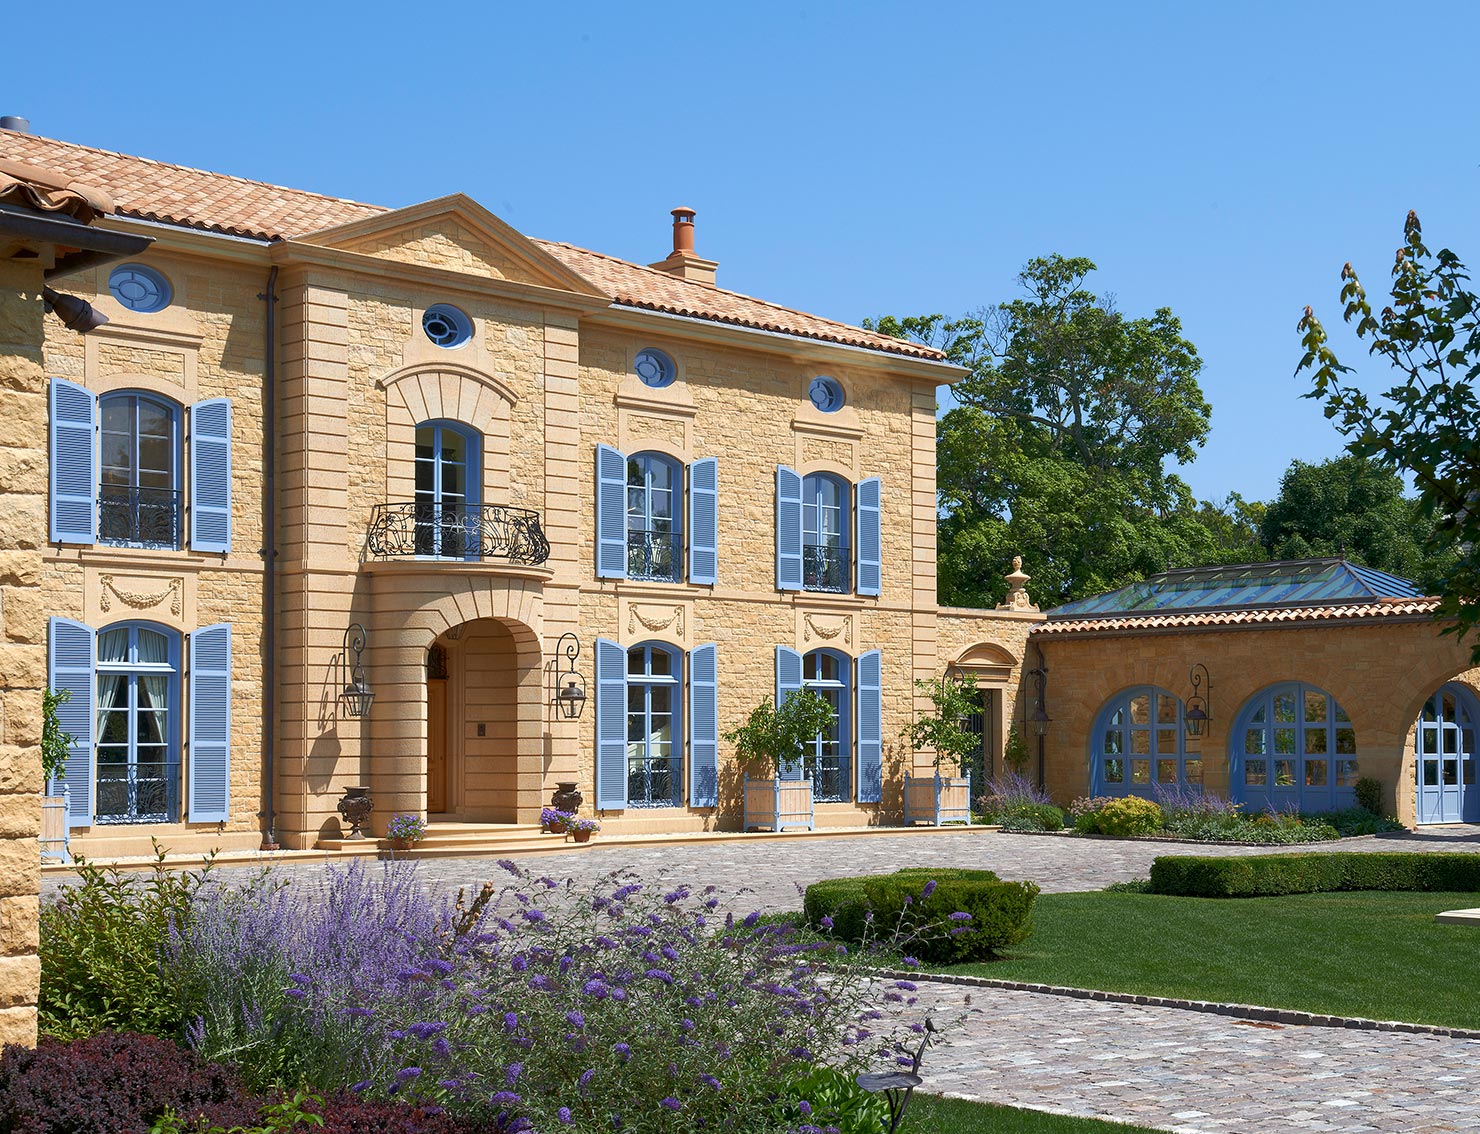 Liederbach & Graham: A Classical Villa in the Manner of the French Riviera Exterior Detail 2